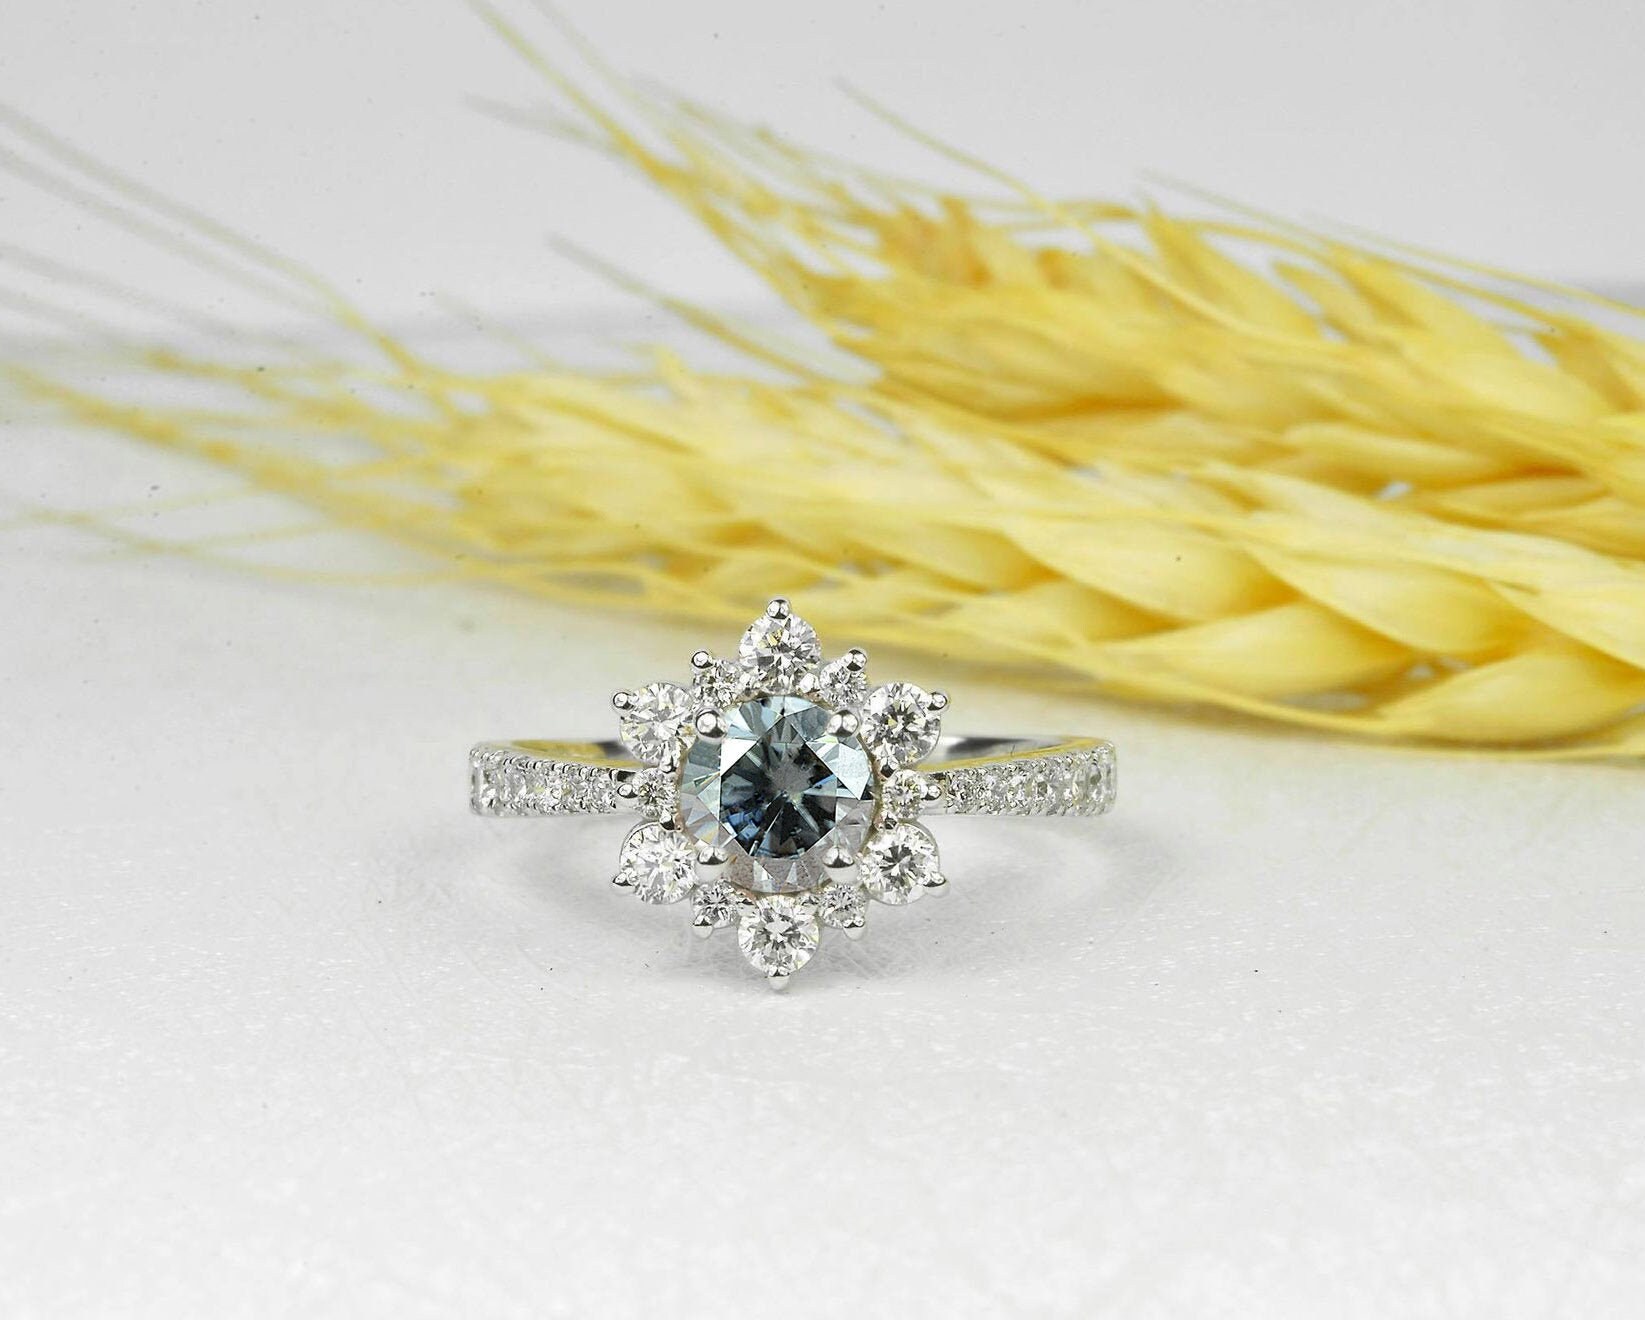 Grey Moissanite Engagement Ring | Diamond Cluster White Gold Vintage Ring Halo Anniversary Unique